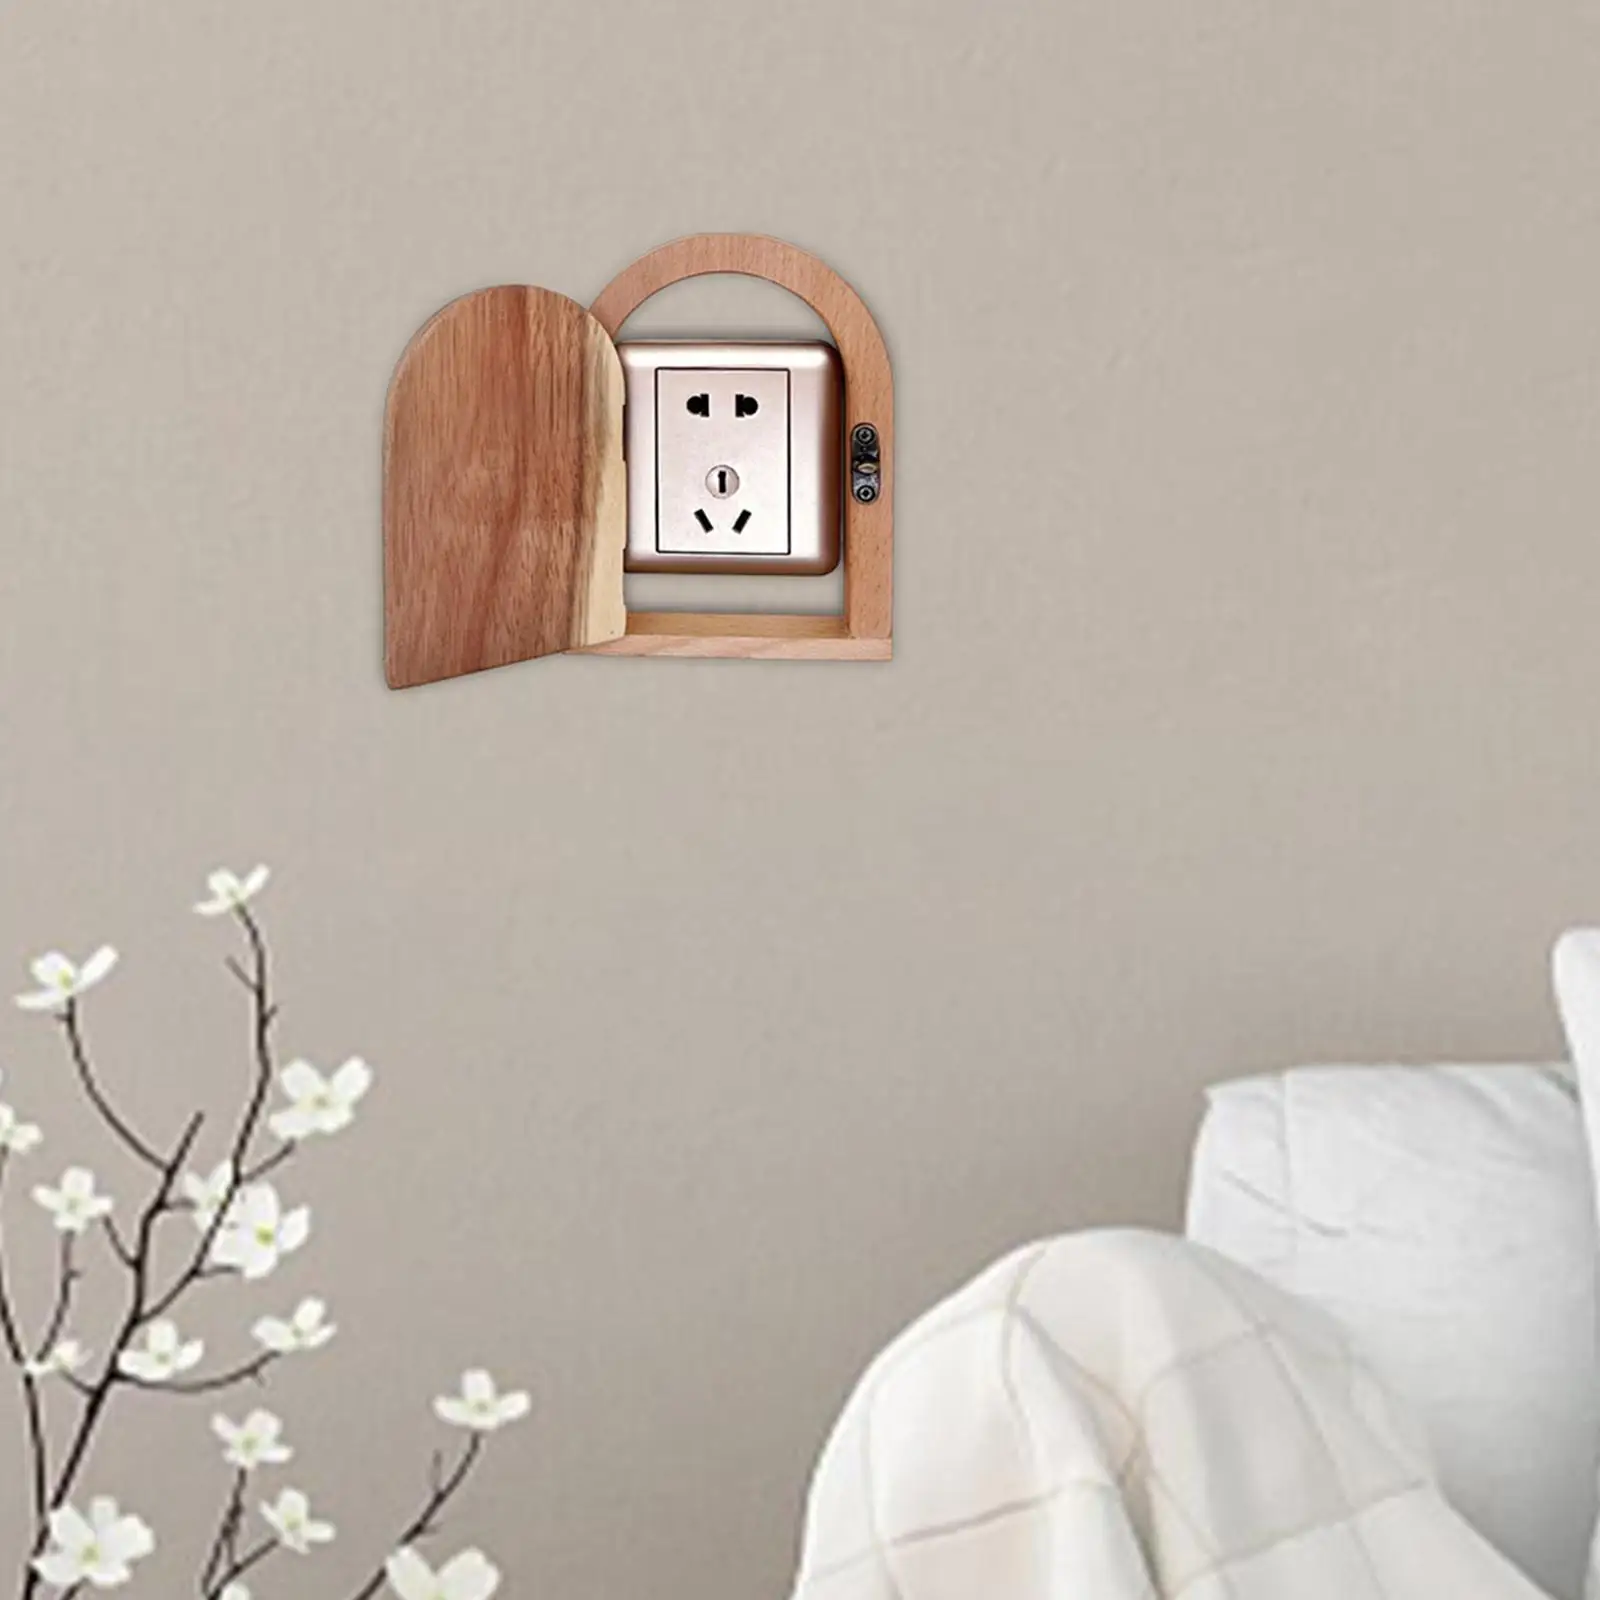 Outlet Covers Wood Switch Box Waterproof Wall Socket Box Lockable Outlet Box for Office Living Room Warehouse